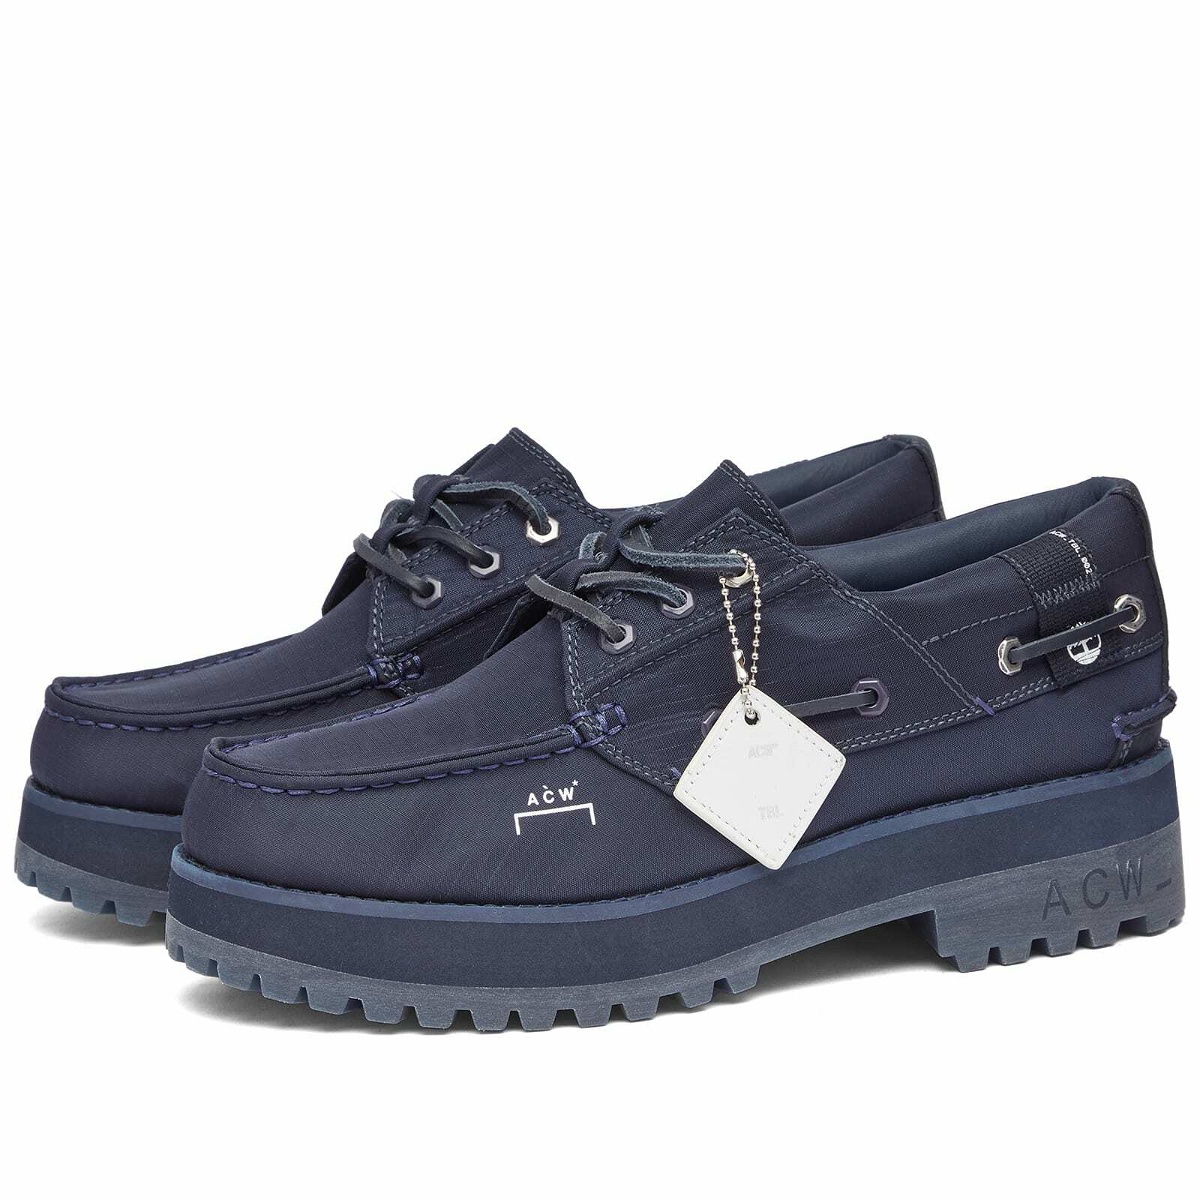 A-COLD-WALL* Men's x Timberland 3 Eye Boat Shoe in Dark Sapphire Navy A ...